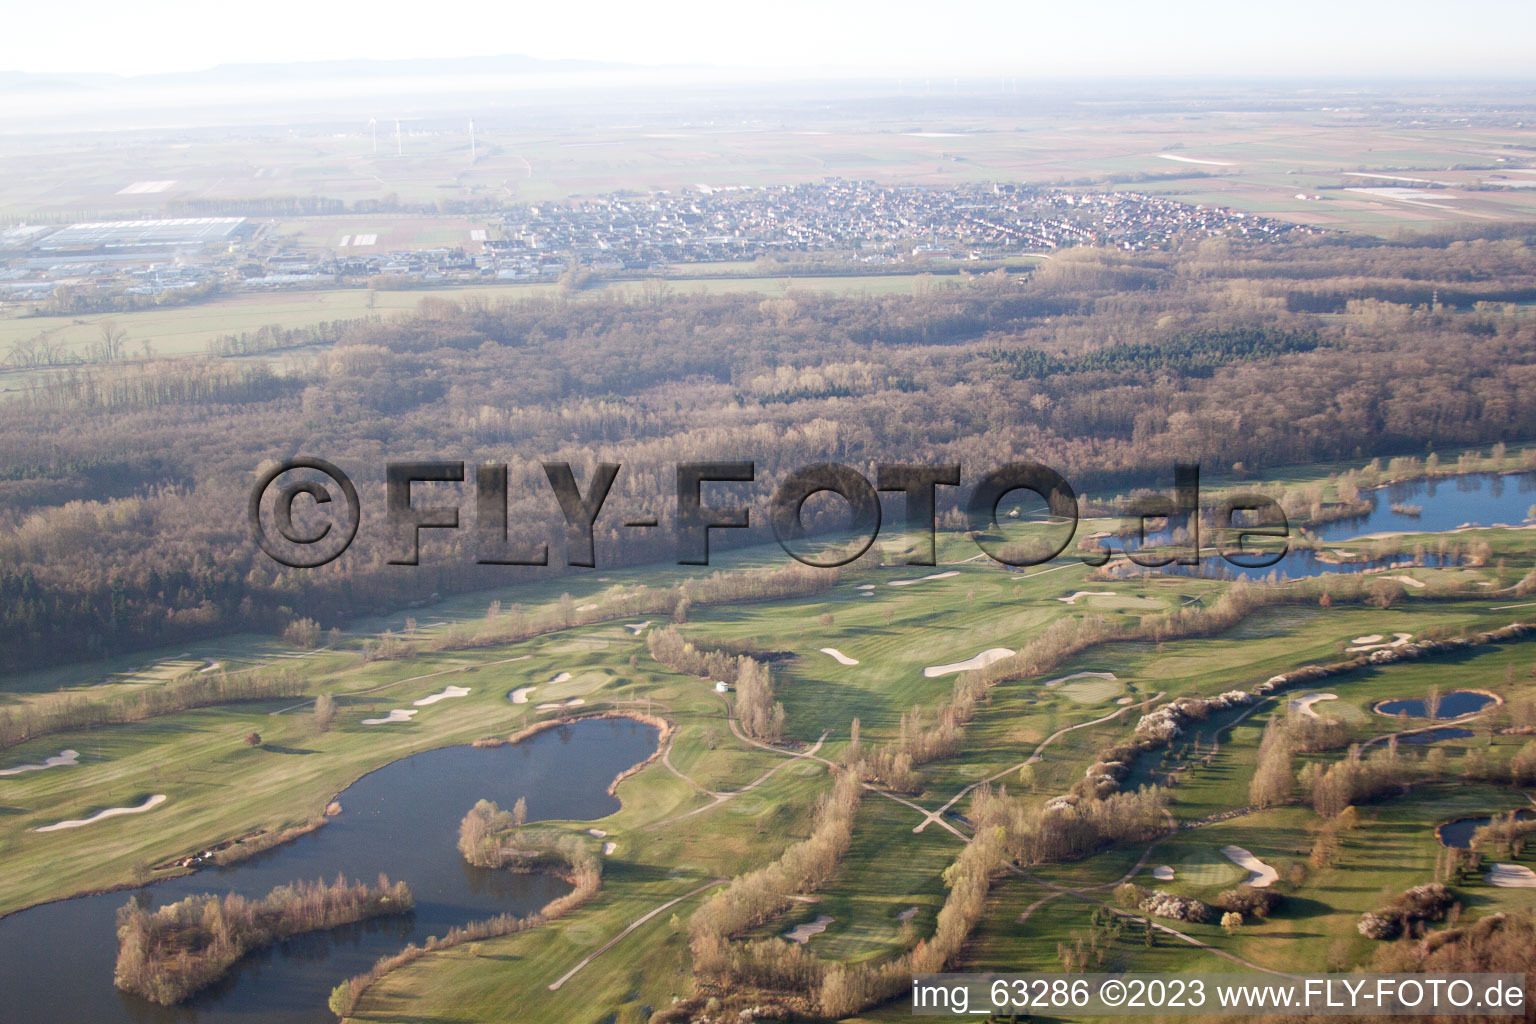 Aerial photograpy of Dreihof Golf Club in Essingen in the state Rhineland-Palatinate, Germany